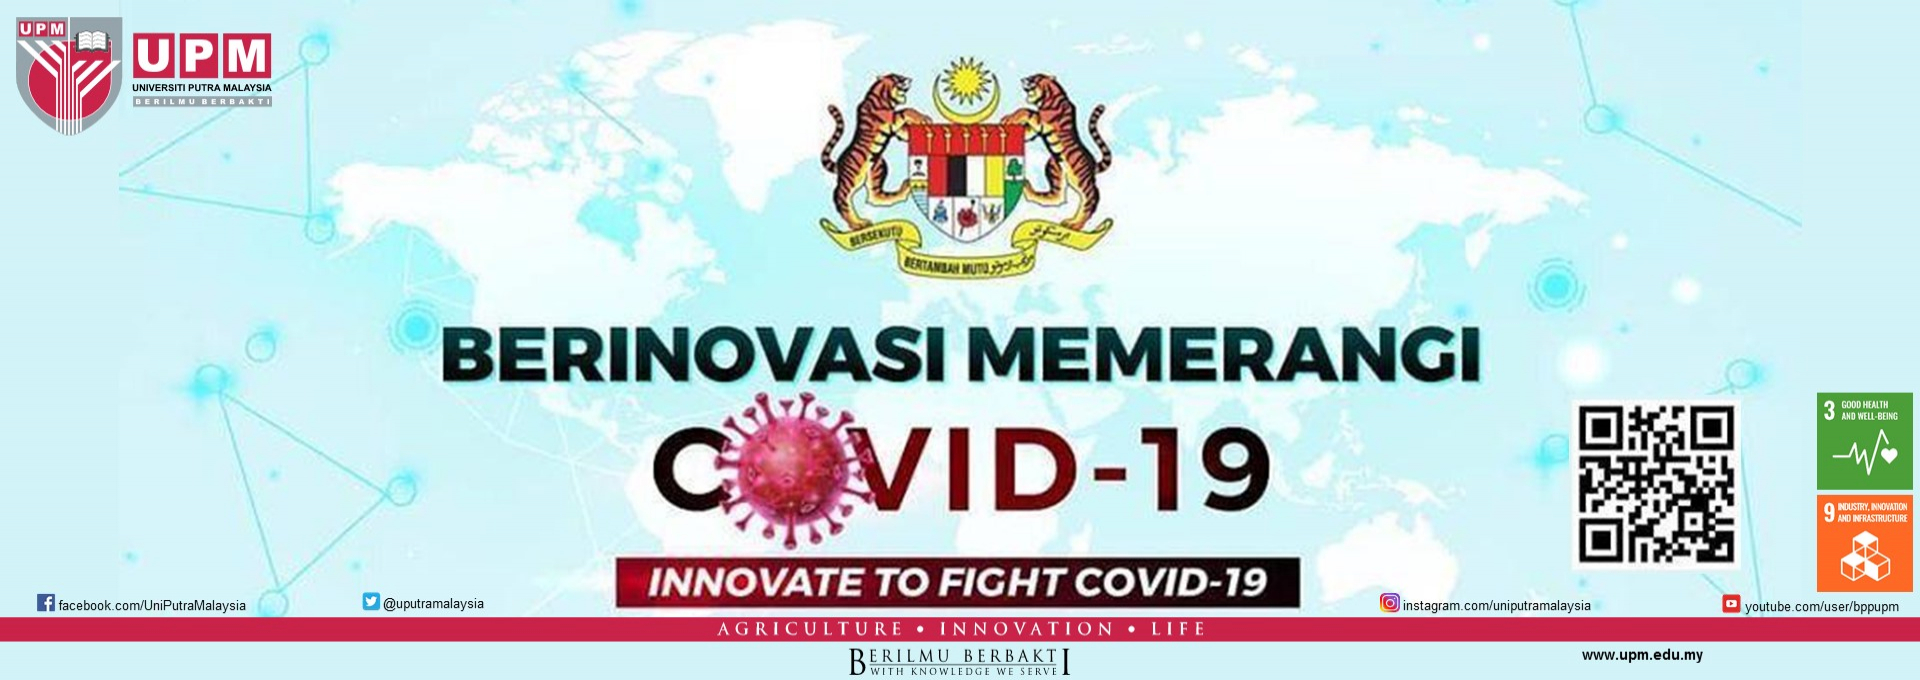 INNOVATE TO FIGHT COVID-19